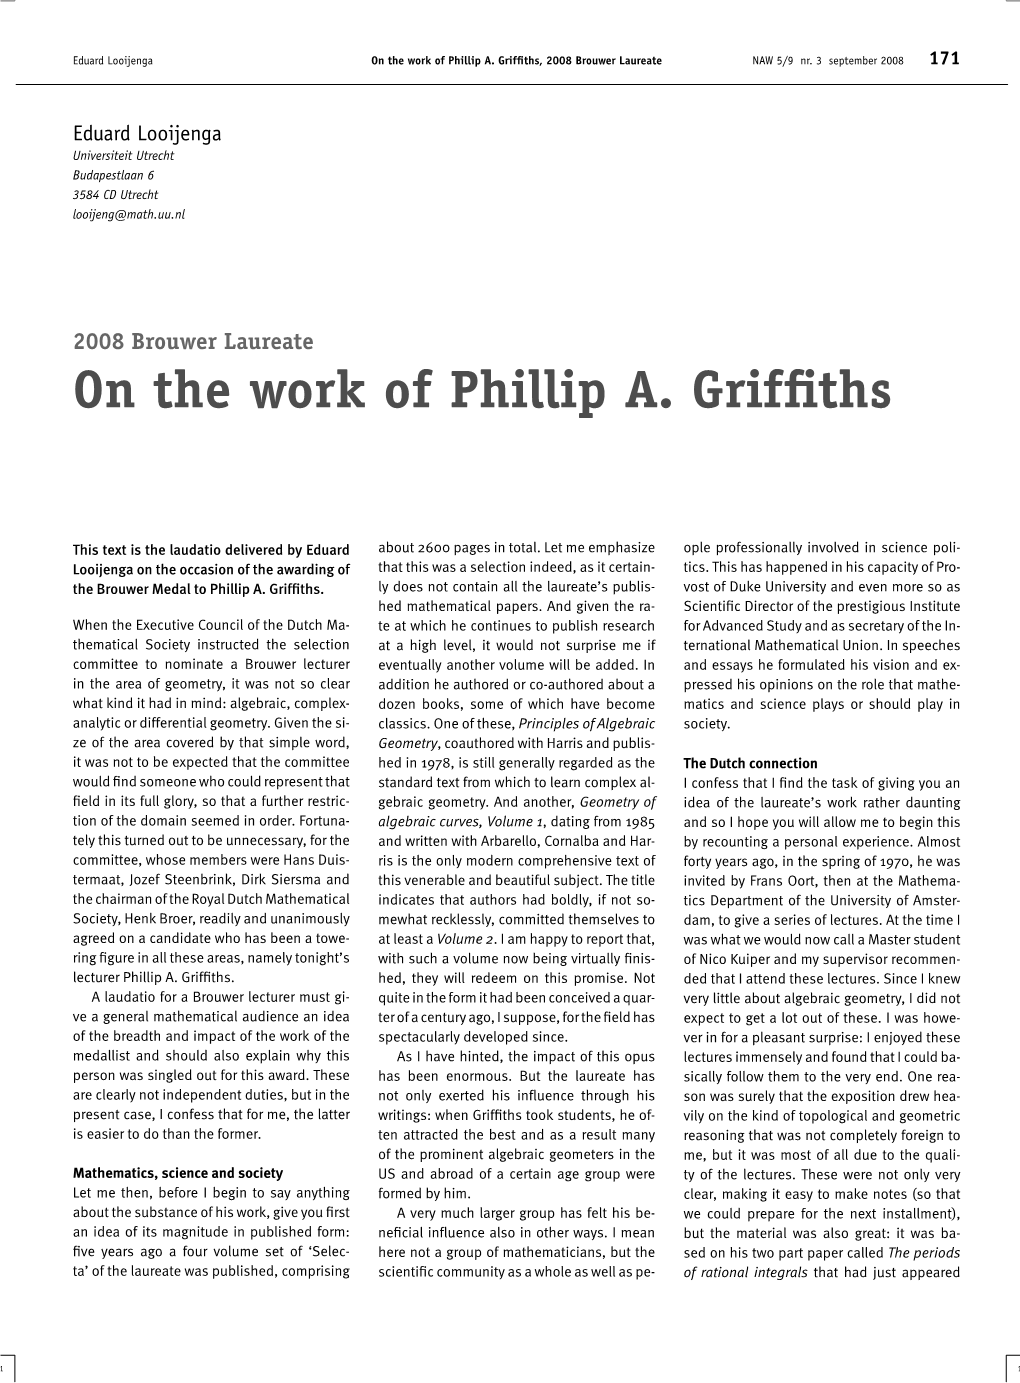 On the Work of Phillip A. Griffiths